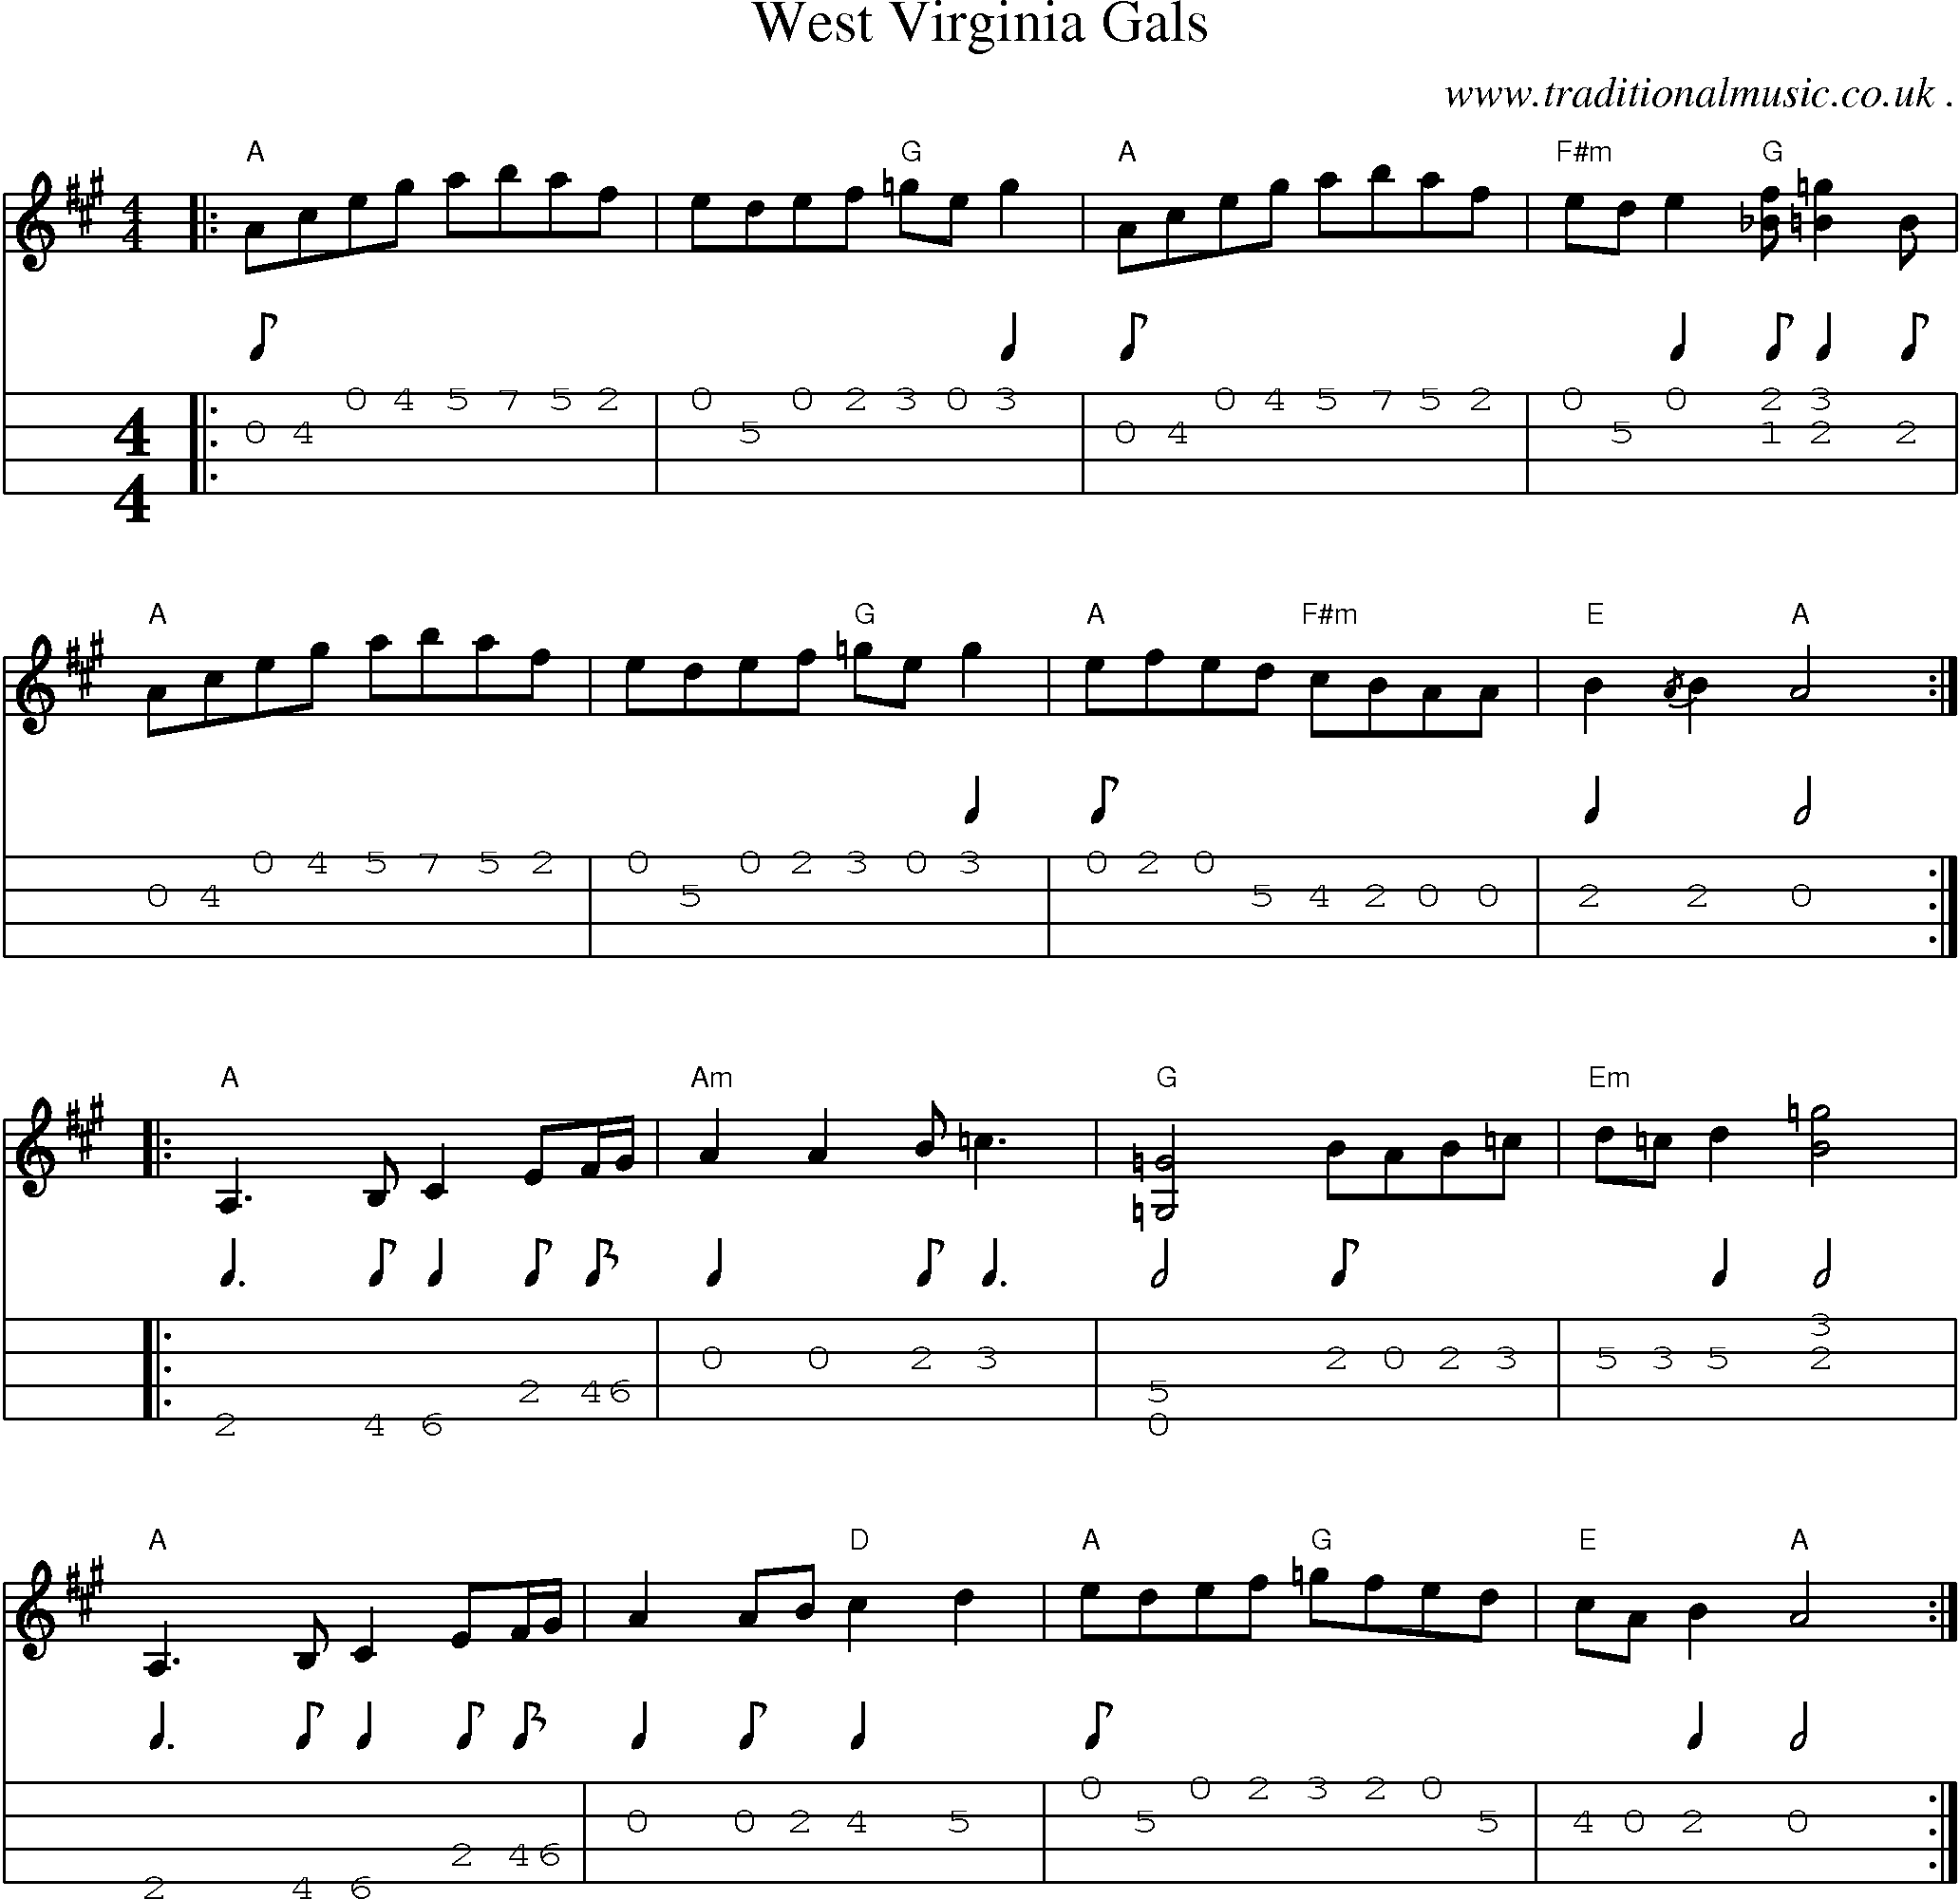 Music Score and Mandolin Tabs for West Virginia Gals